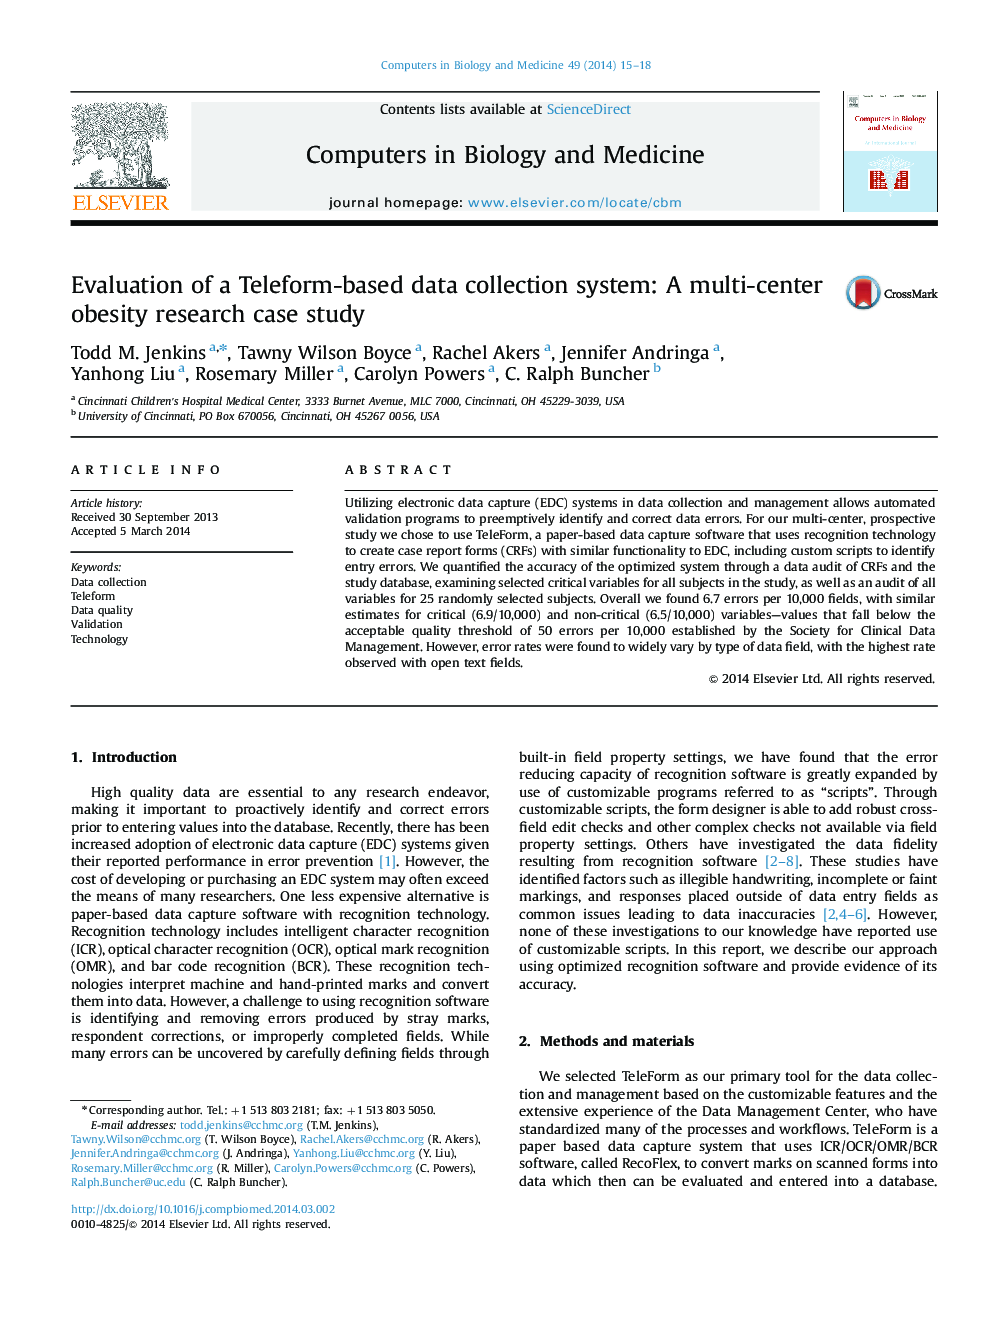 Evaluation of a Teleform-based data collection system: A multi-center obesity research case study